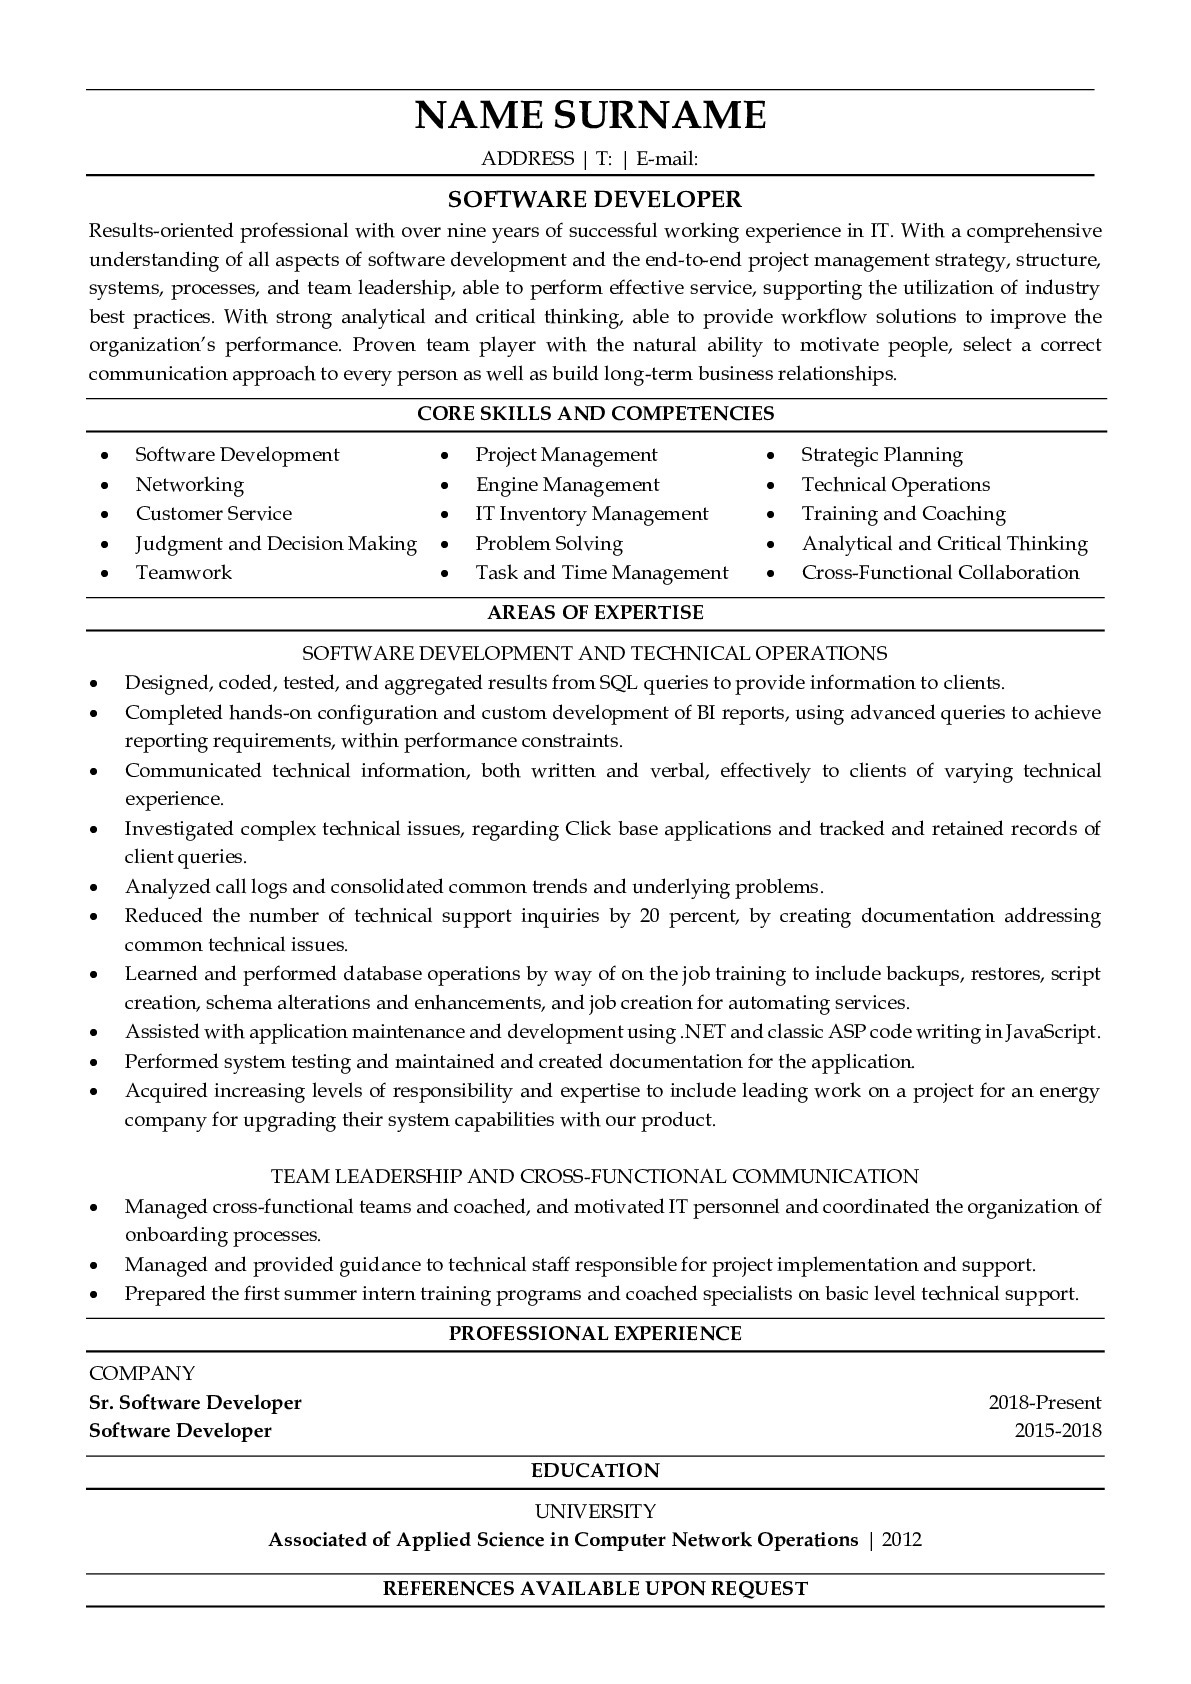 Looking into the guideline of the resume we offer